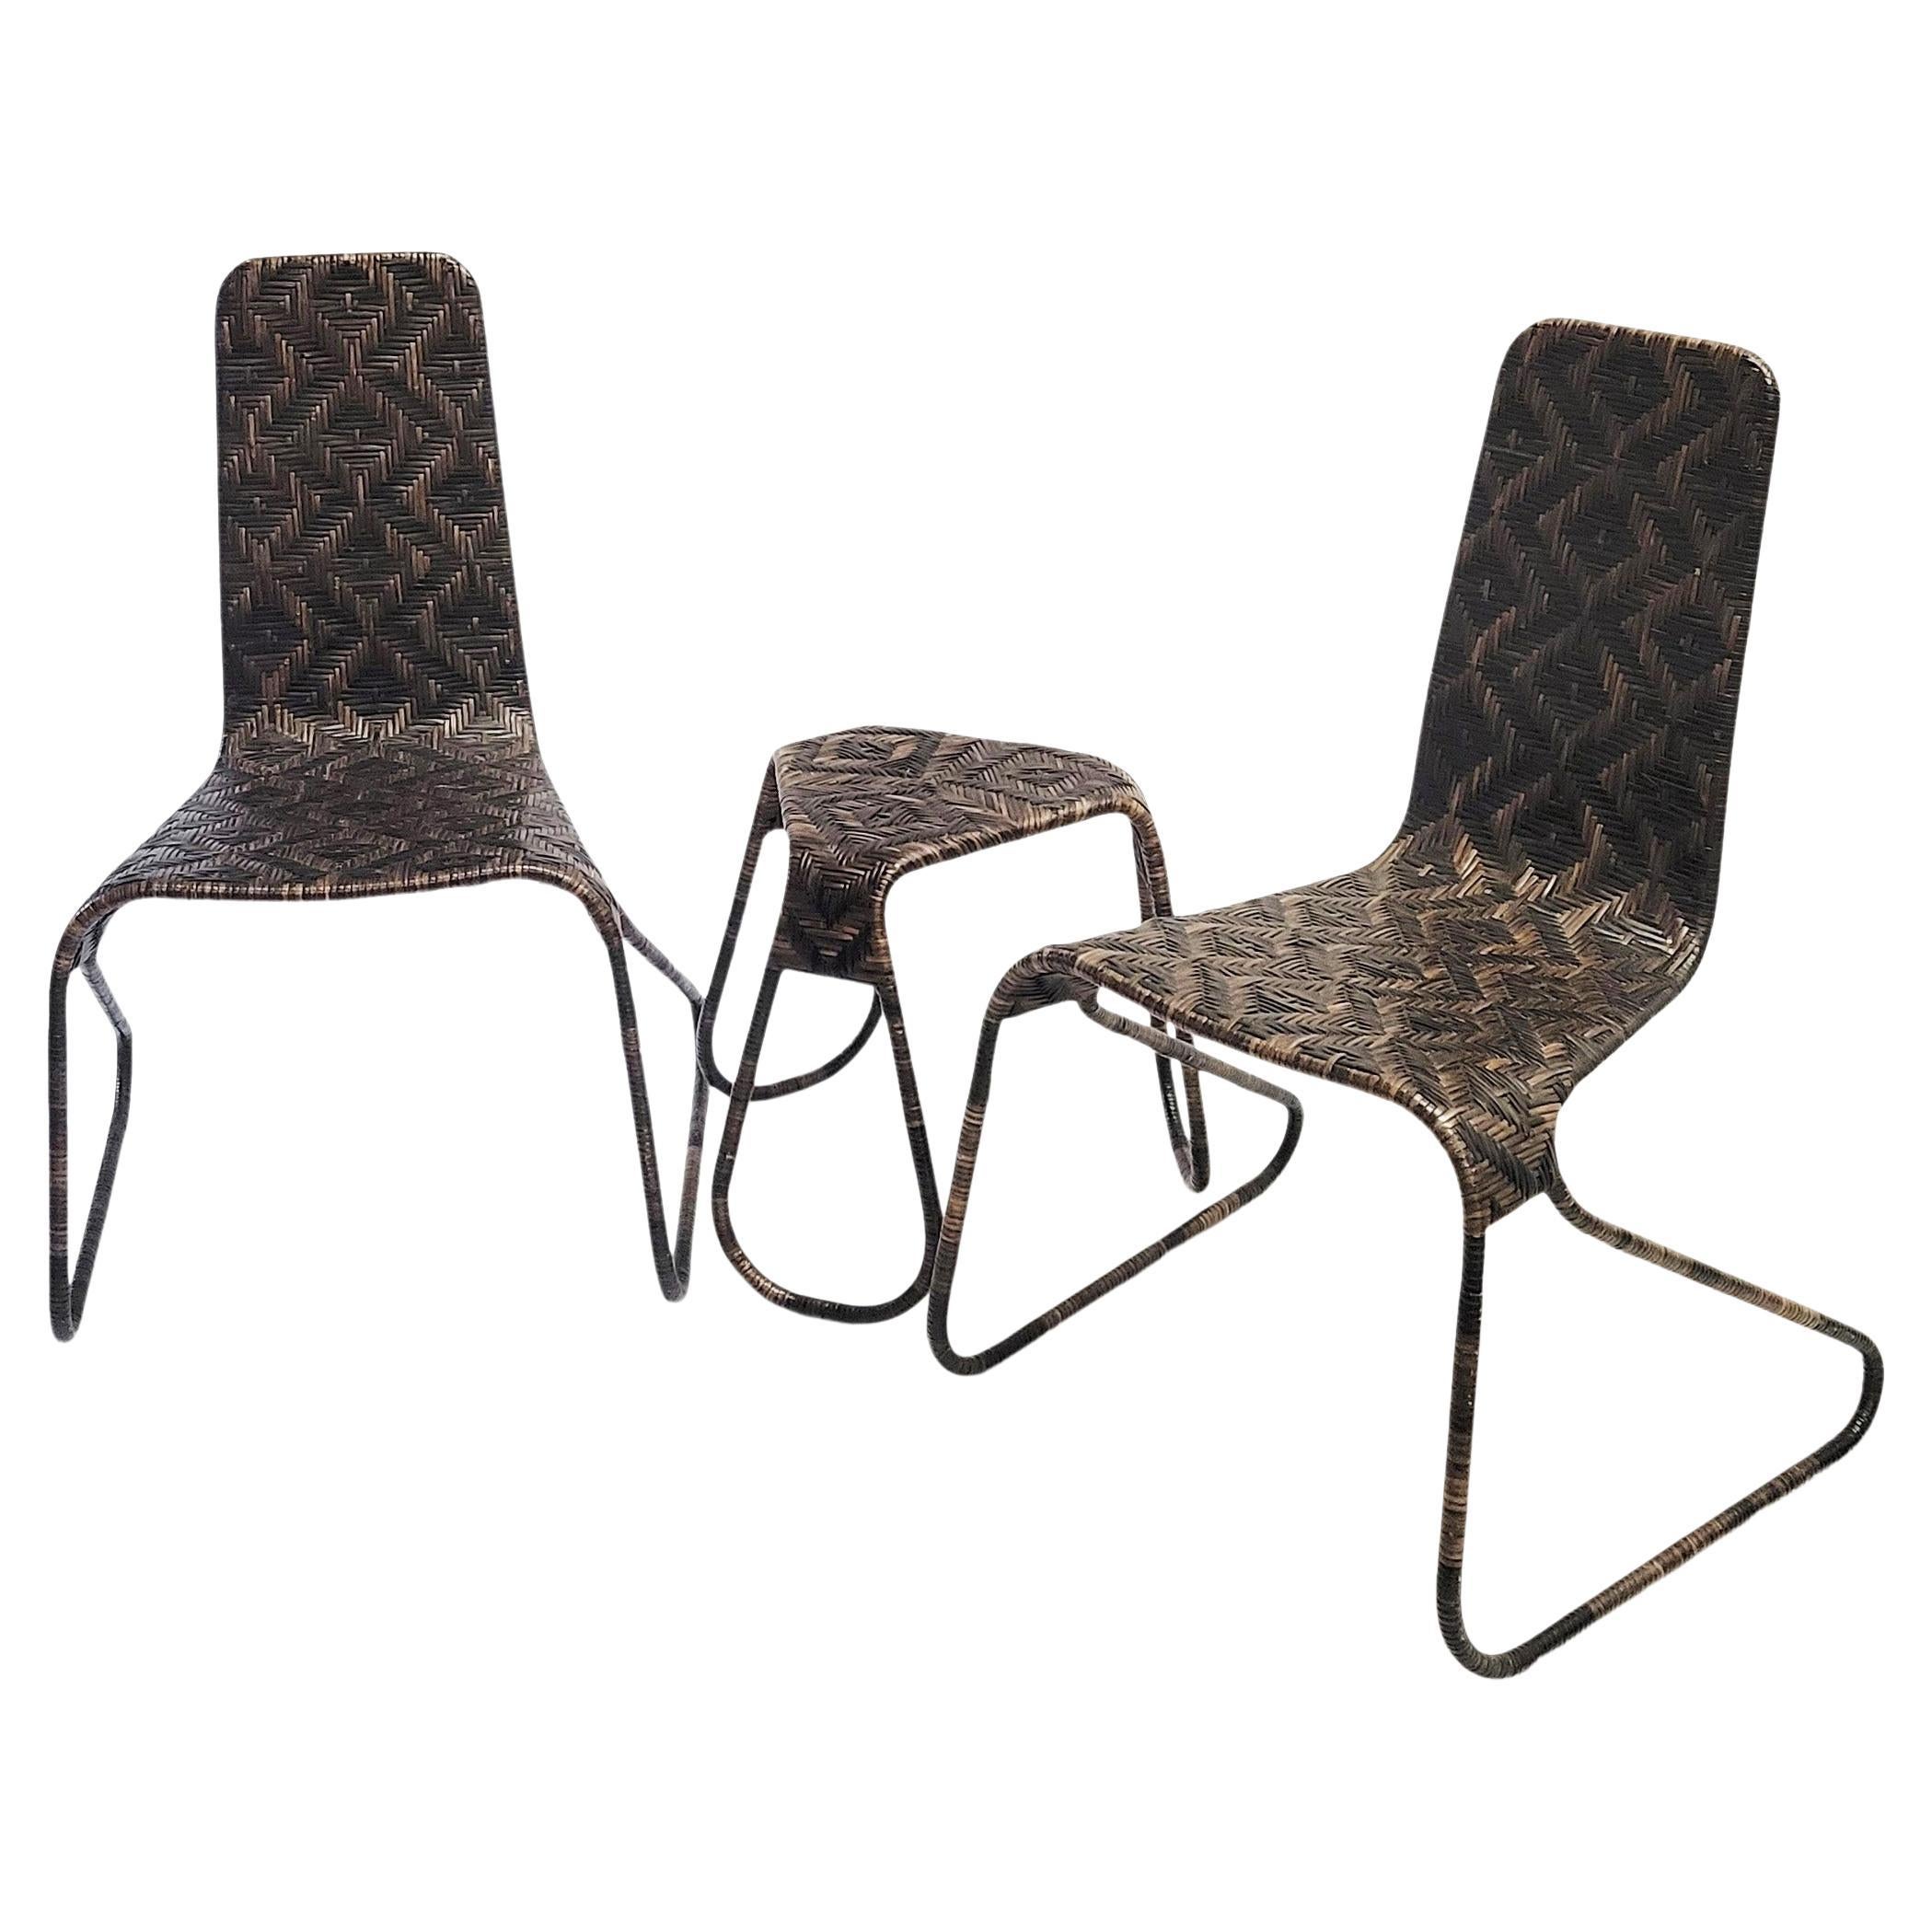 Pair of Flo Chairs and Side Table by Patricia Urquiola for Driade For Sale